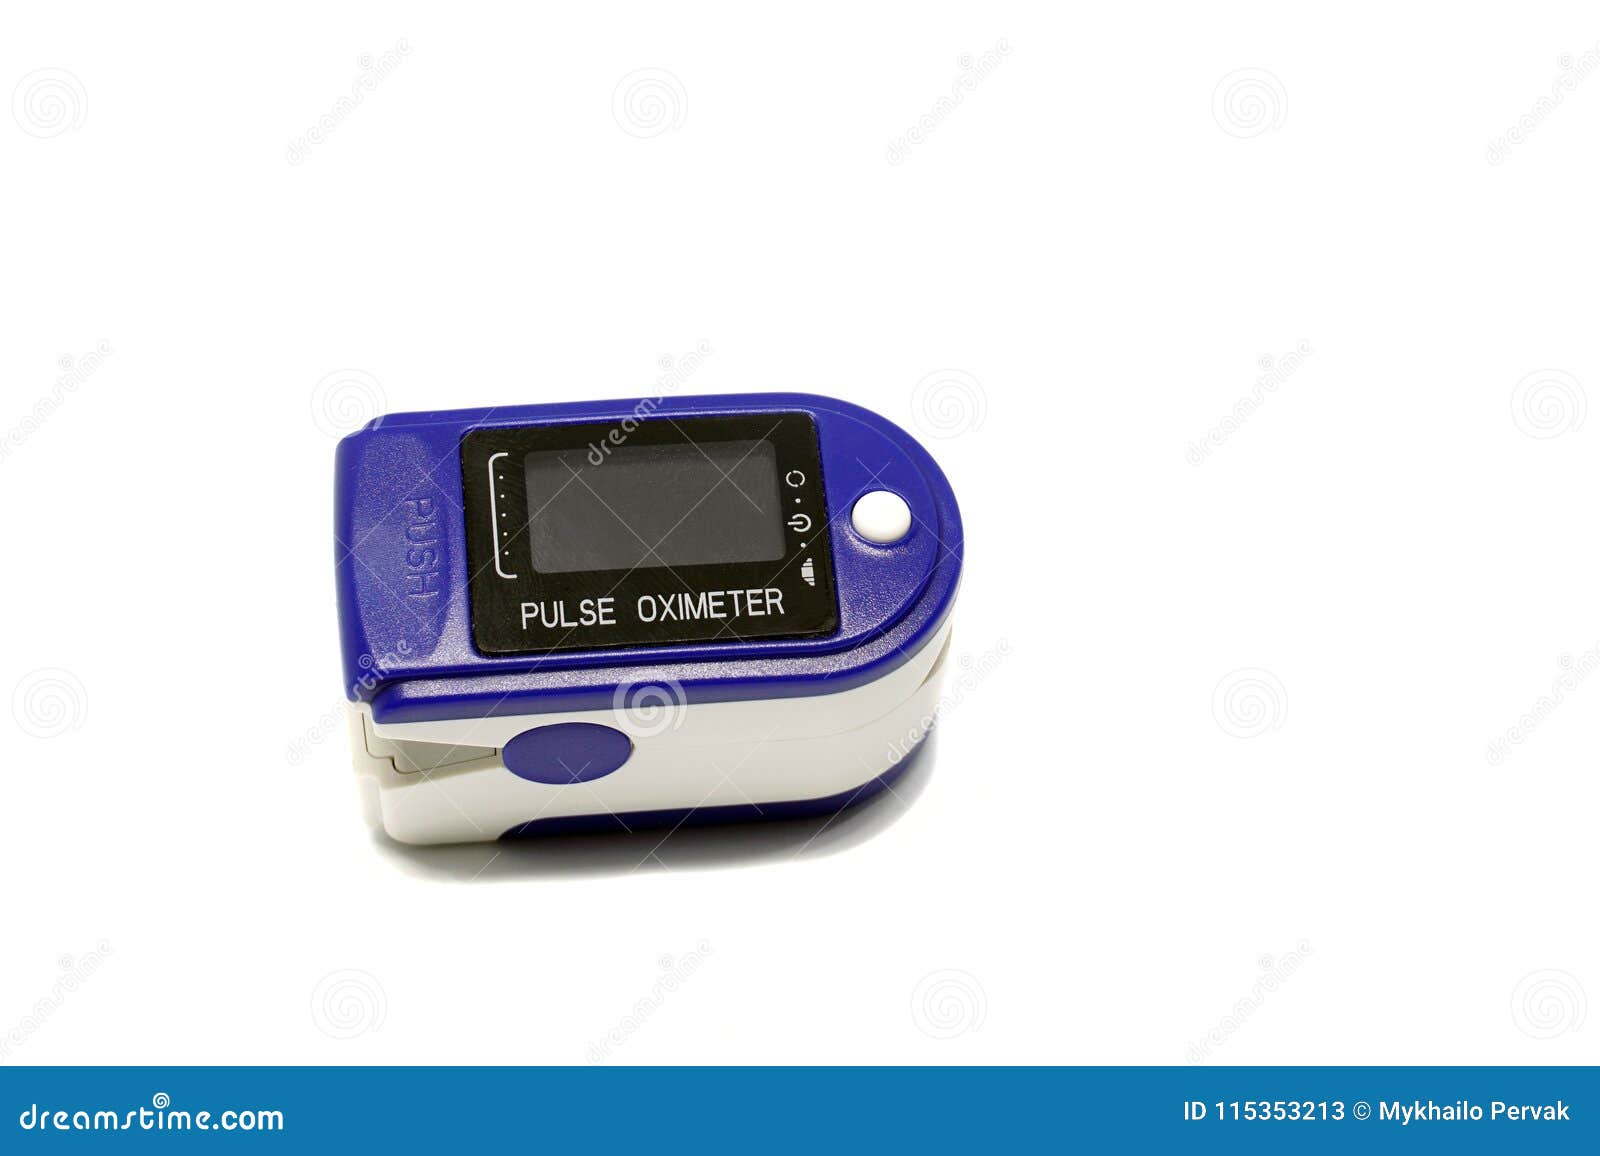 pulse oximeter turned off .